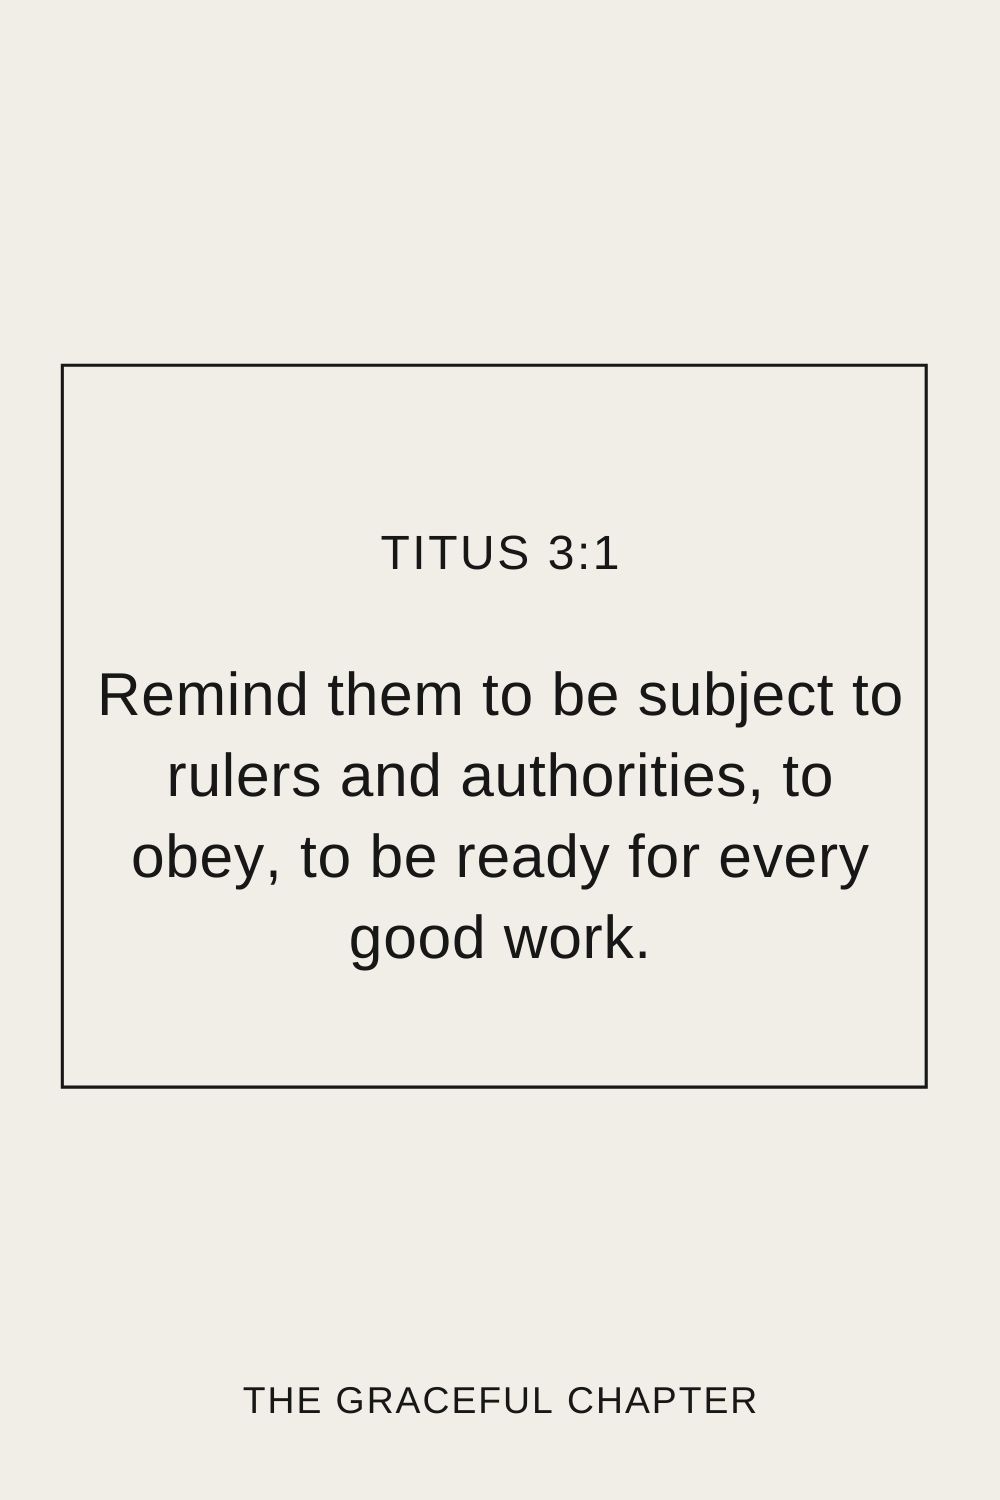 Remind them to be subject to rulers and authorities, to obey, to be ready for every good work. Titus 3:1